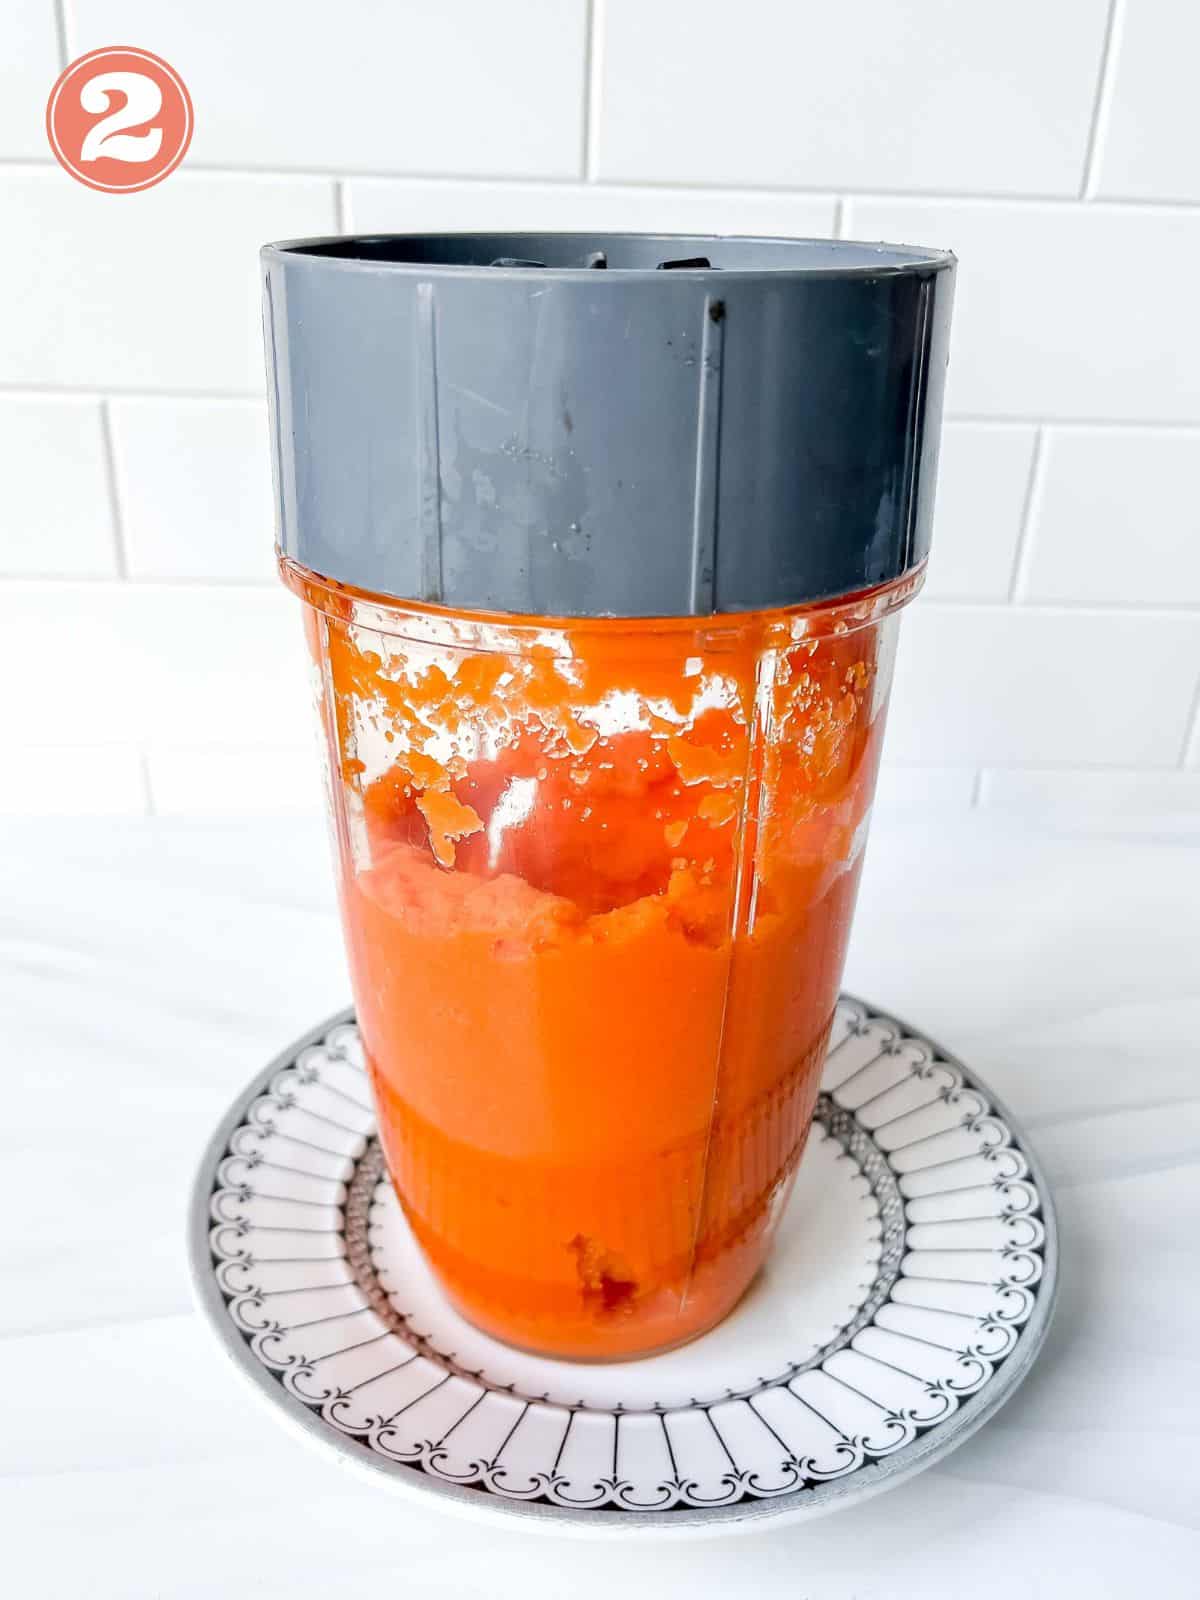 carrot juice in a blender on a plate labelled number two.